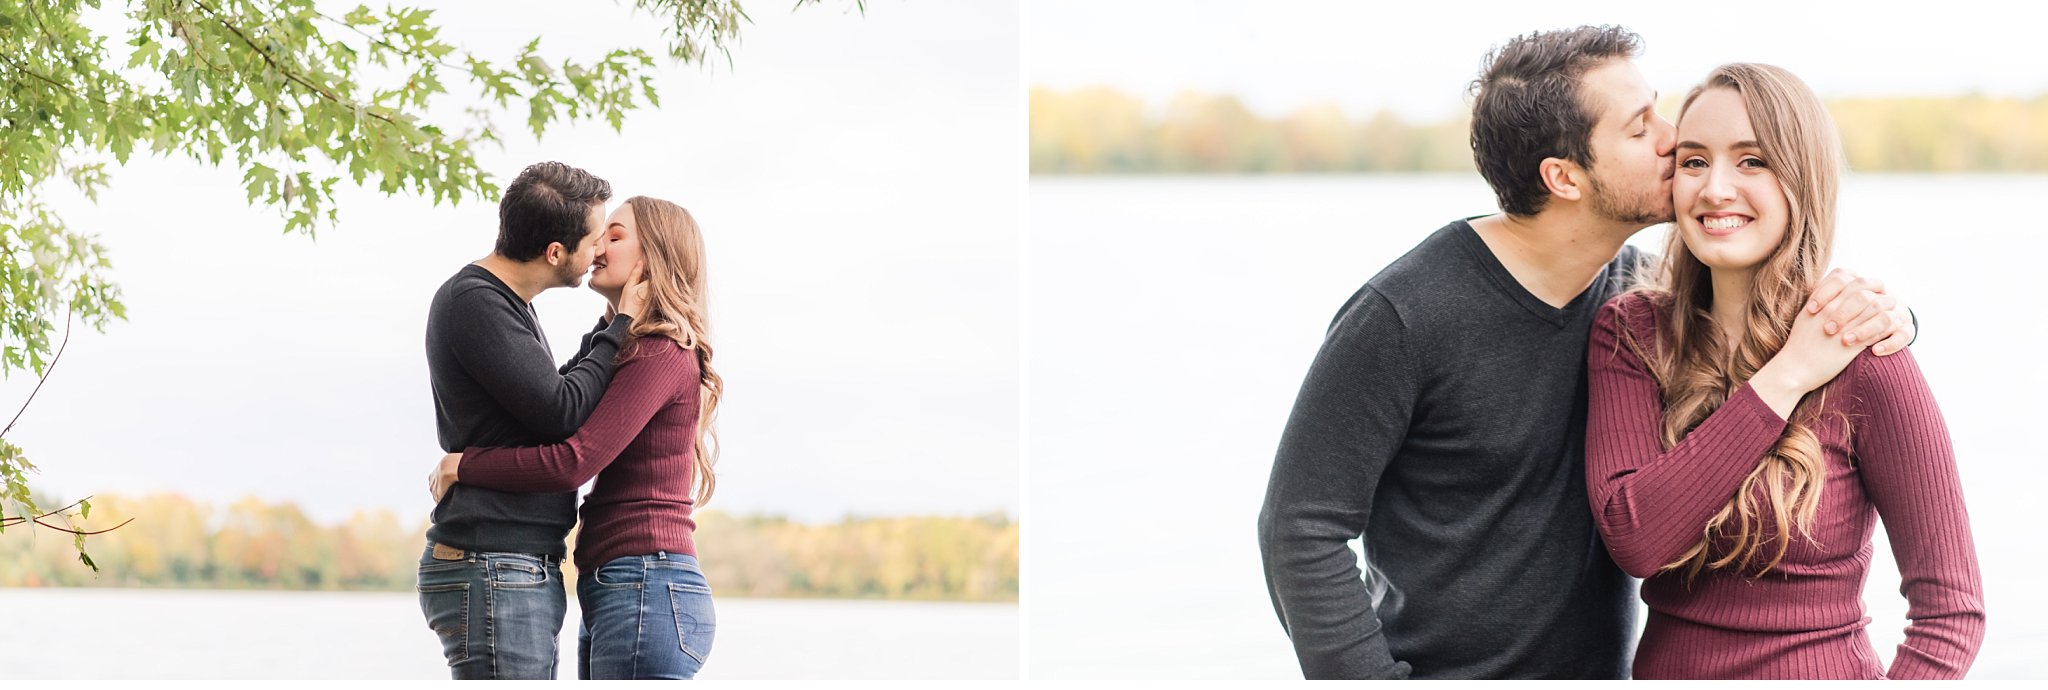 engaged couple at fanshawe conservation area in the fall